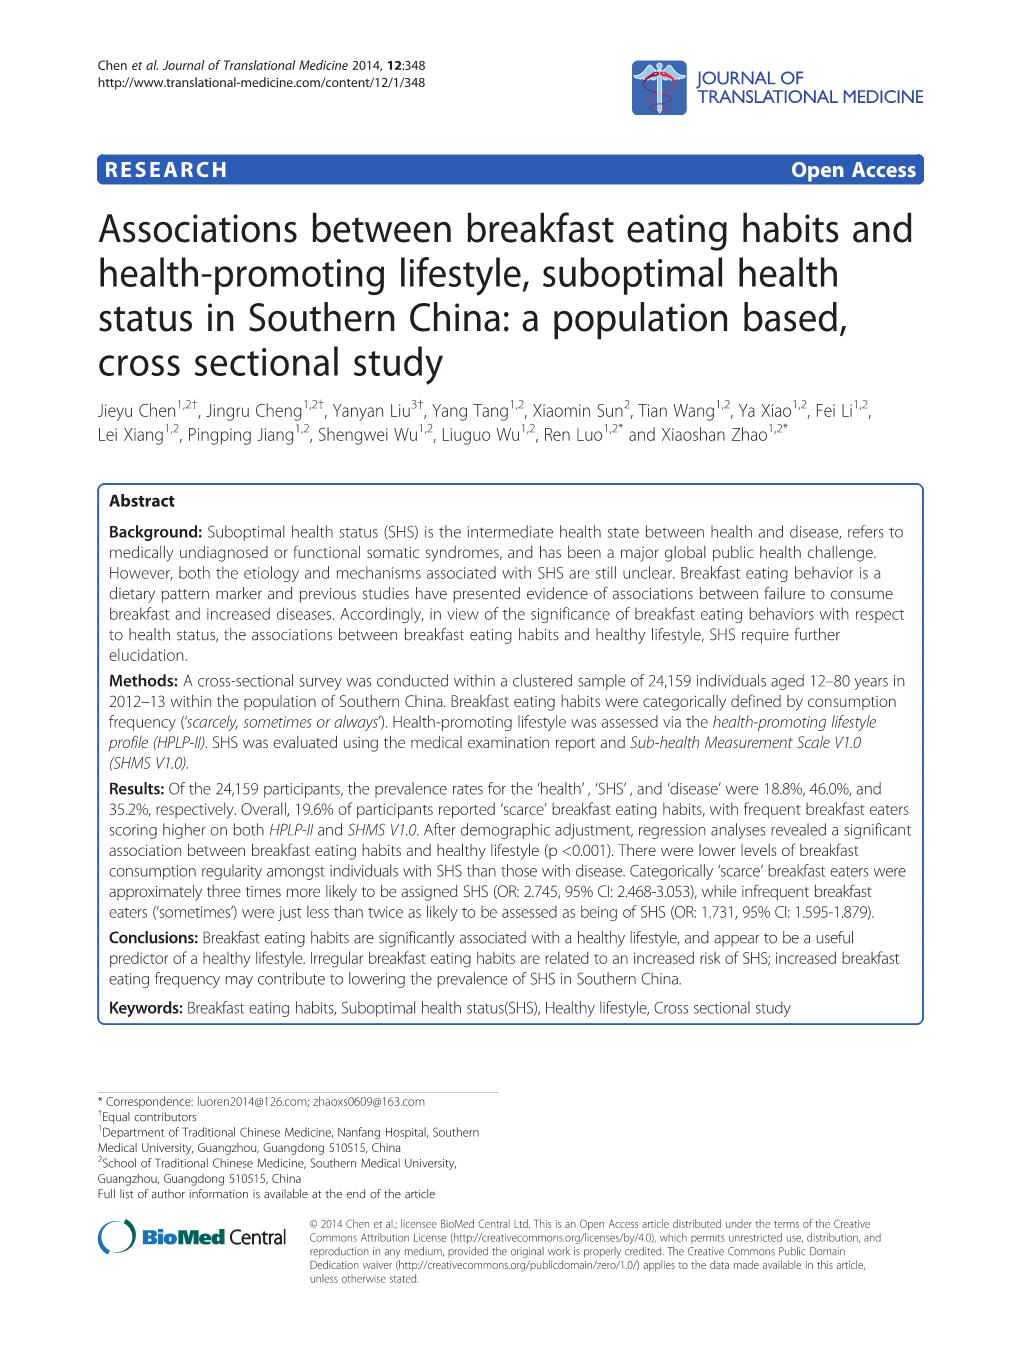 Associations Between Breakfast Eating Habits and Health-Promoting